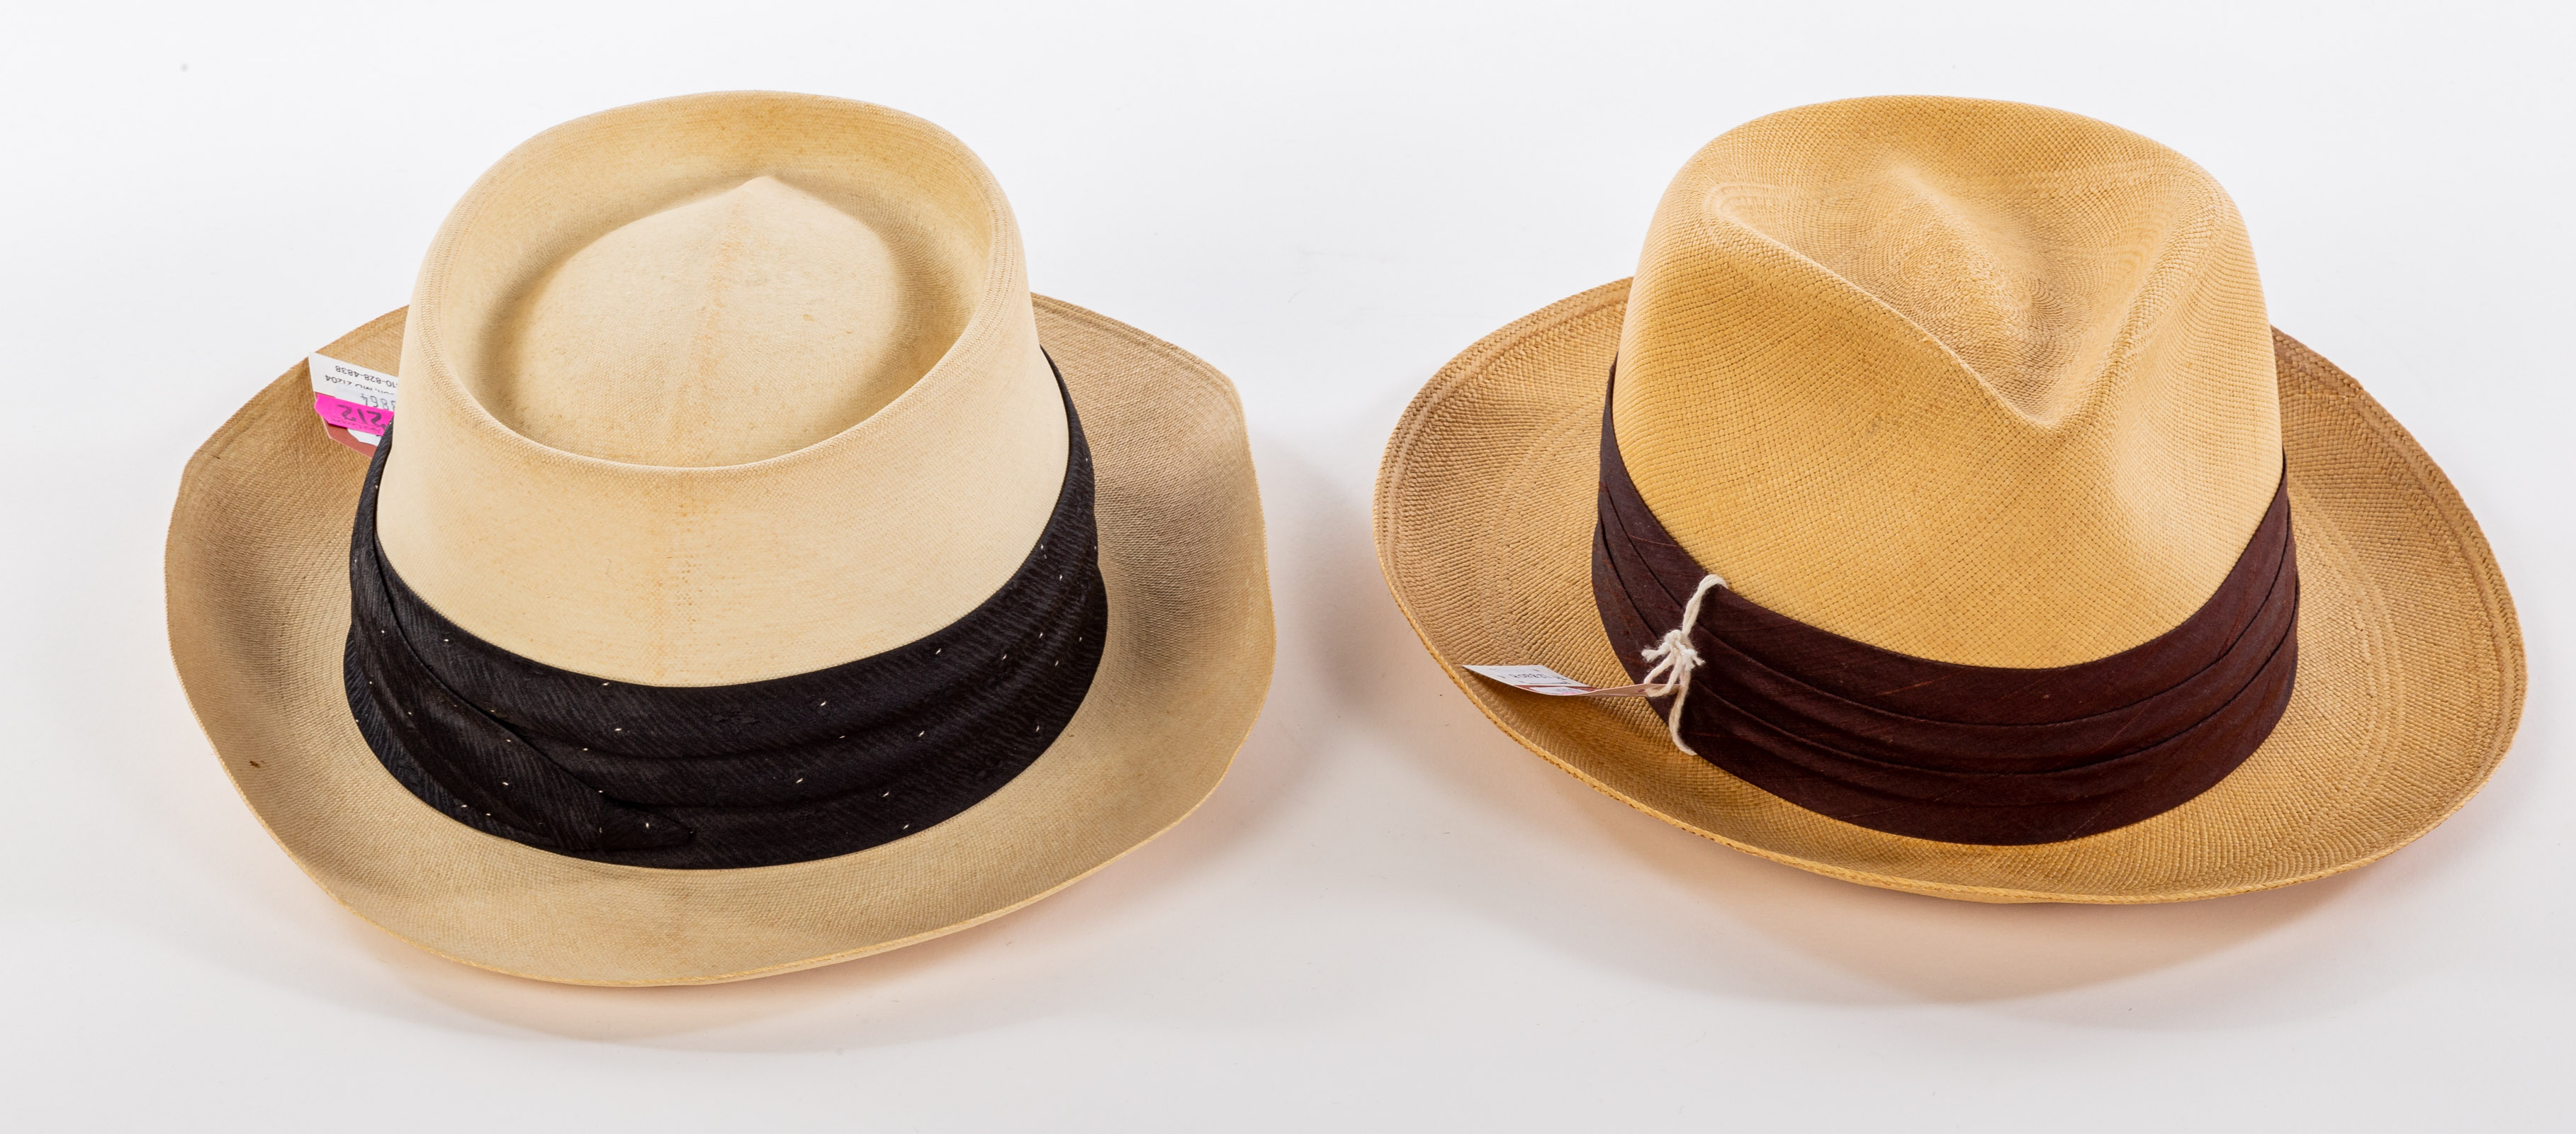 TWO HAND WOVEN STRAW HATS one custom